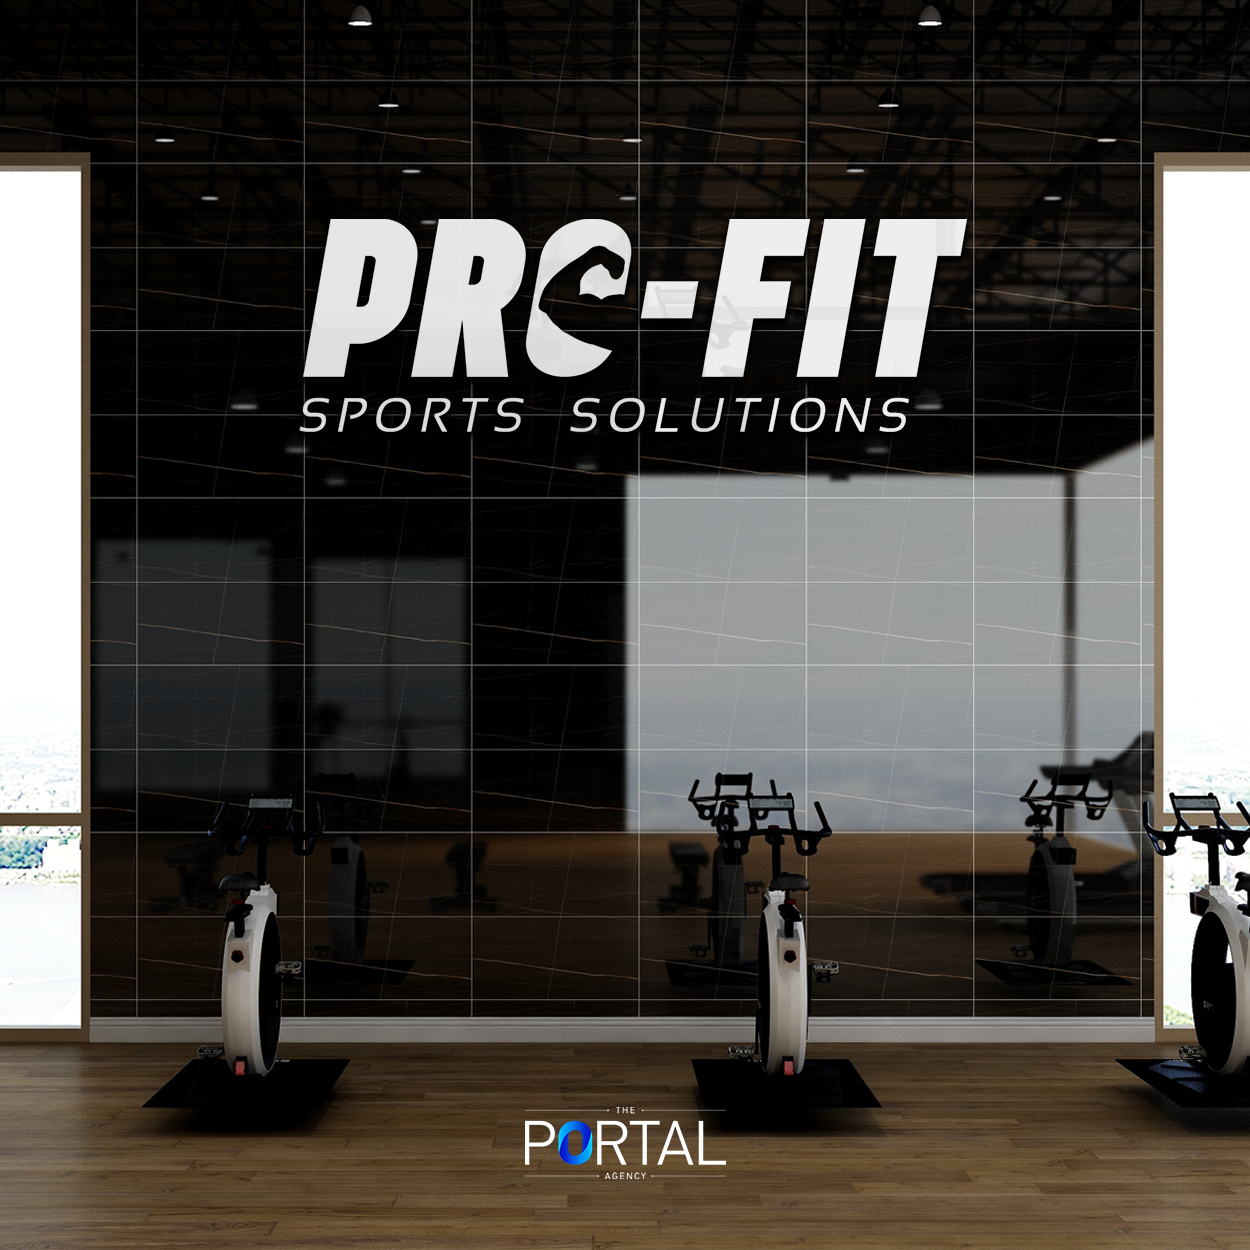 https://theportalagency.com/project/pro-fit-branding/